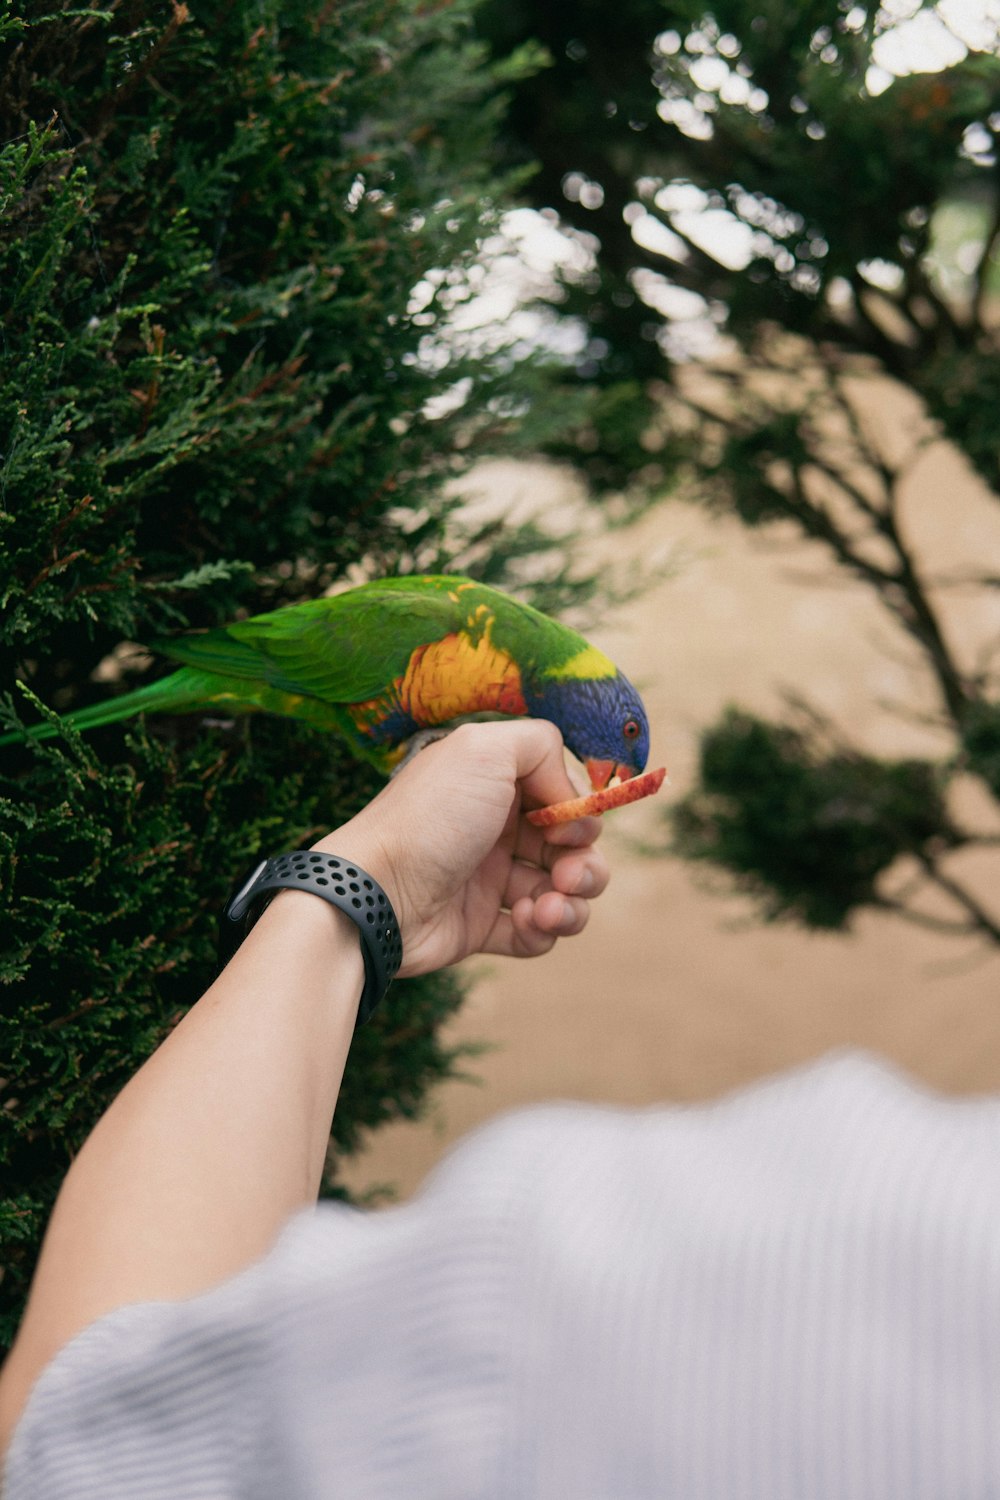 a person holding a colorful bird in their hand